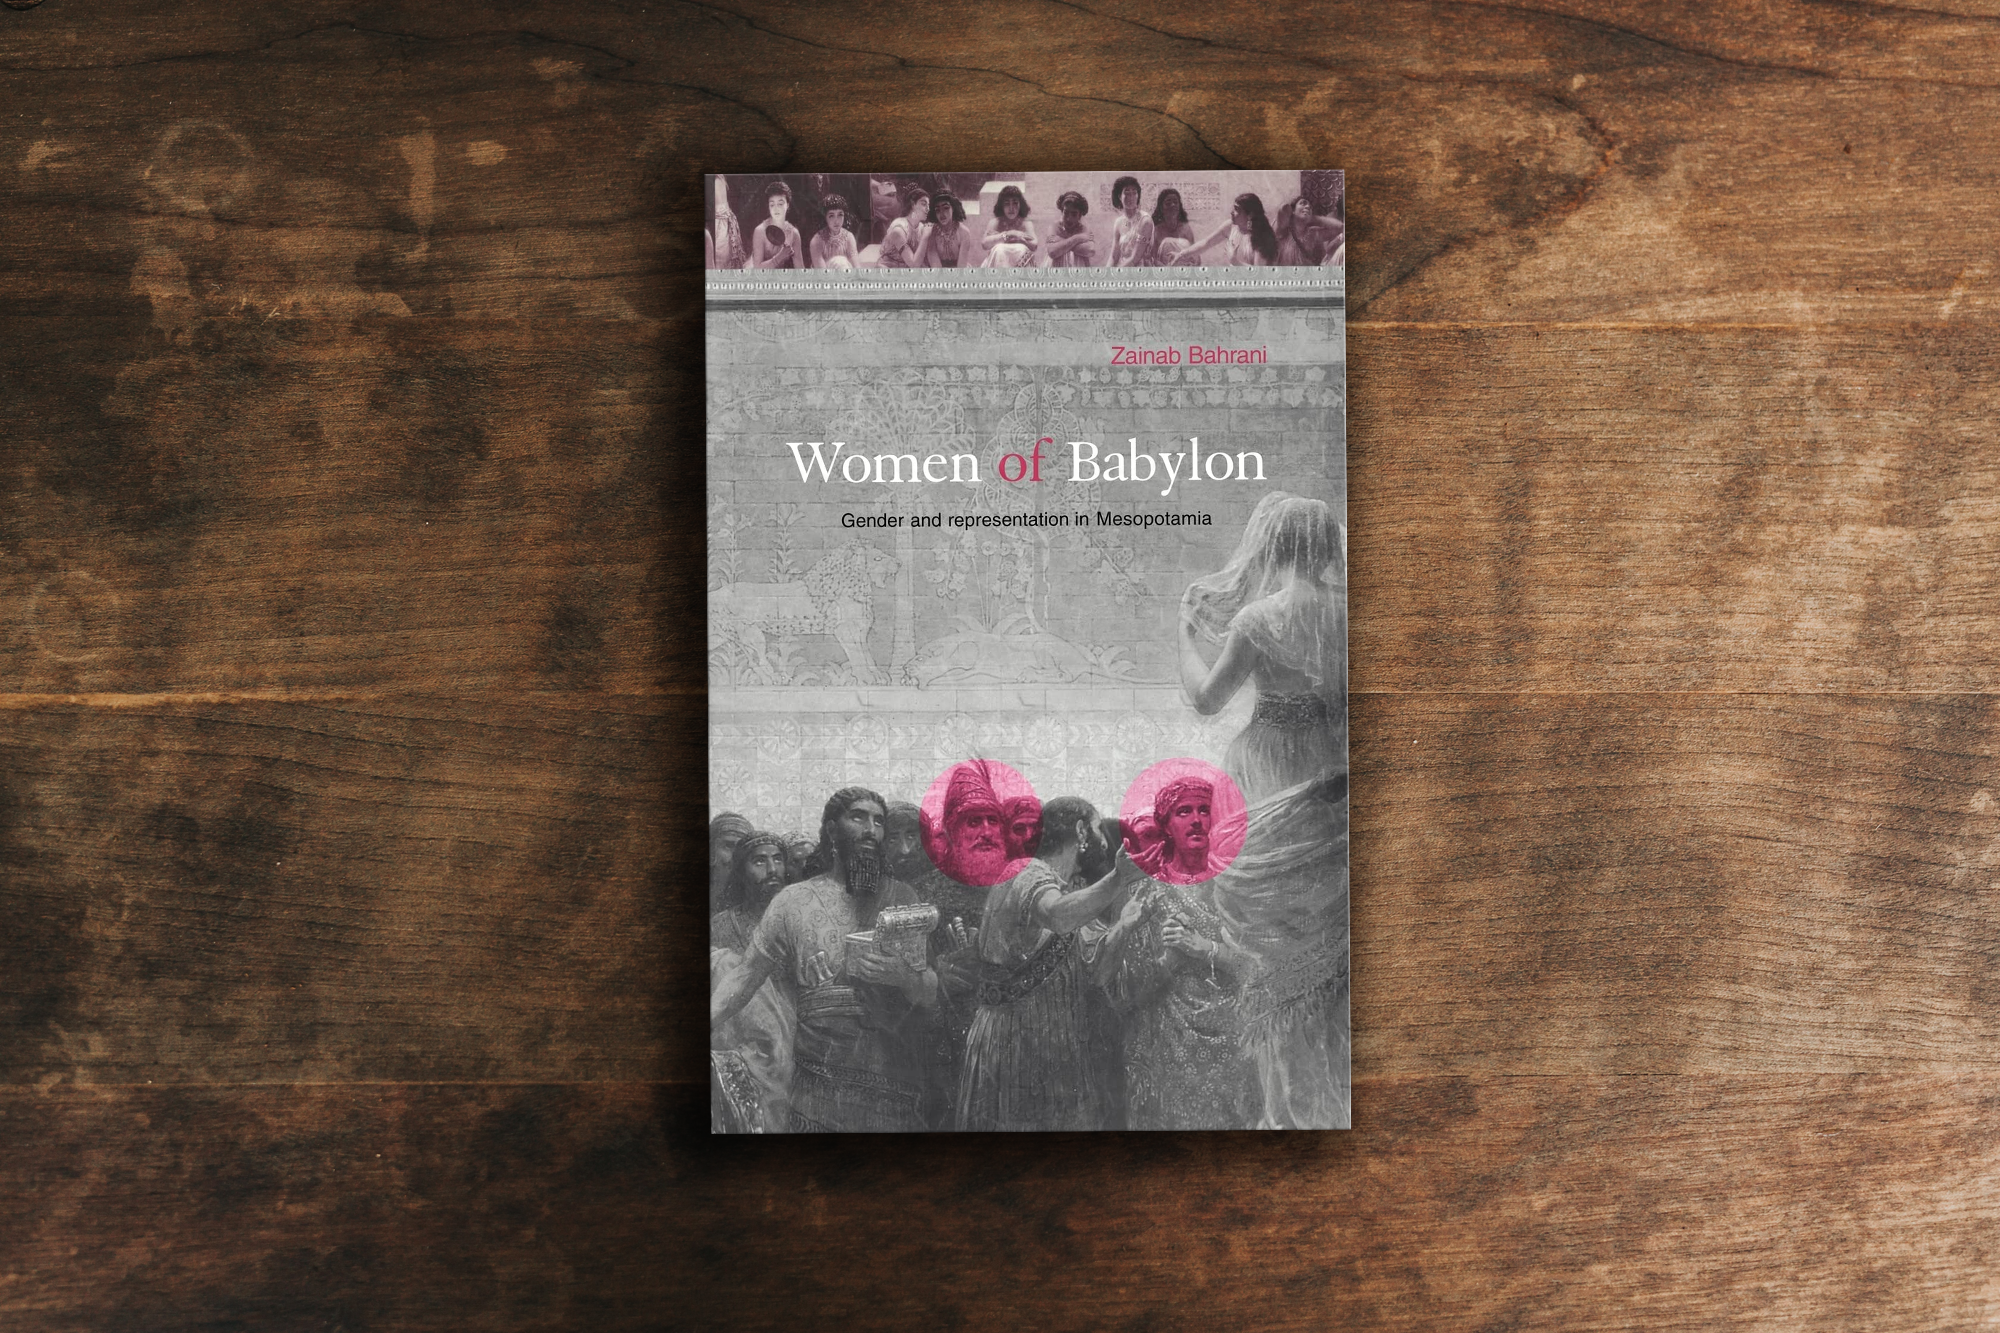 The image shows the book cover of Zainab Bahrani's "Women of Babylon"